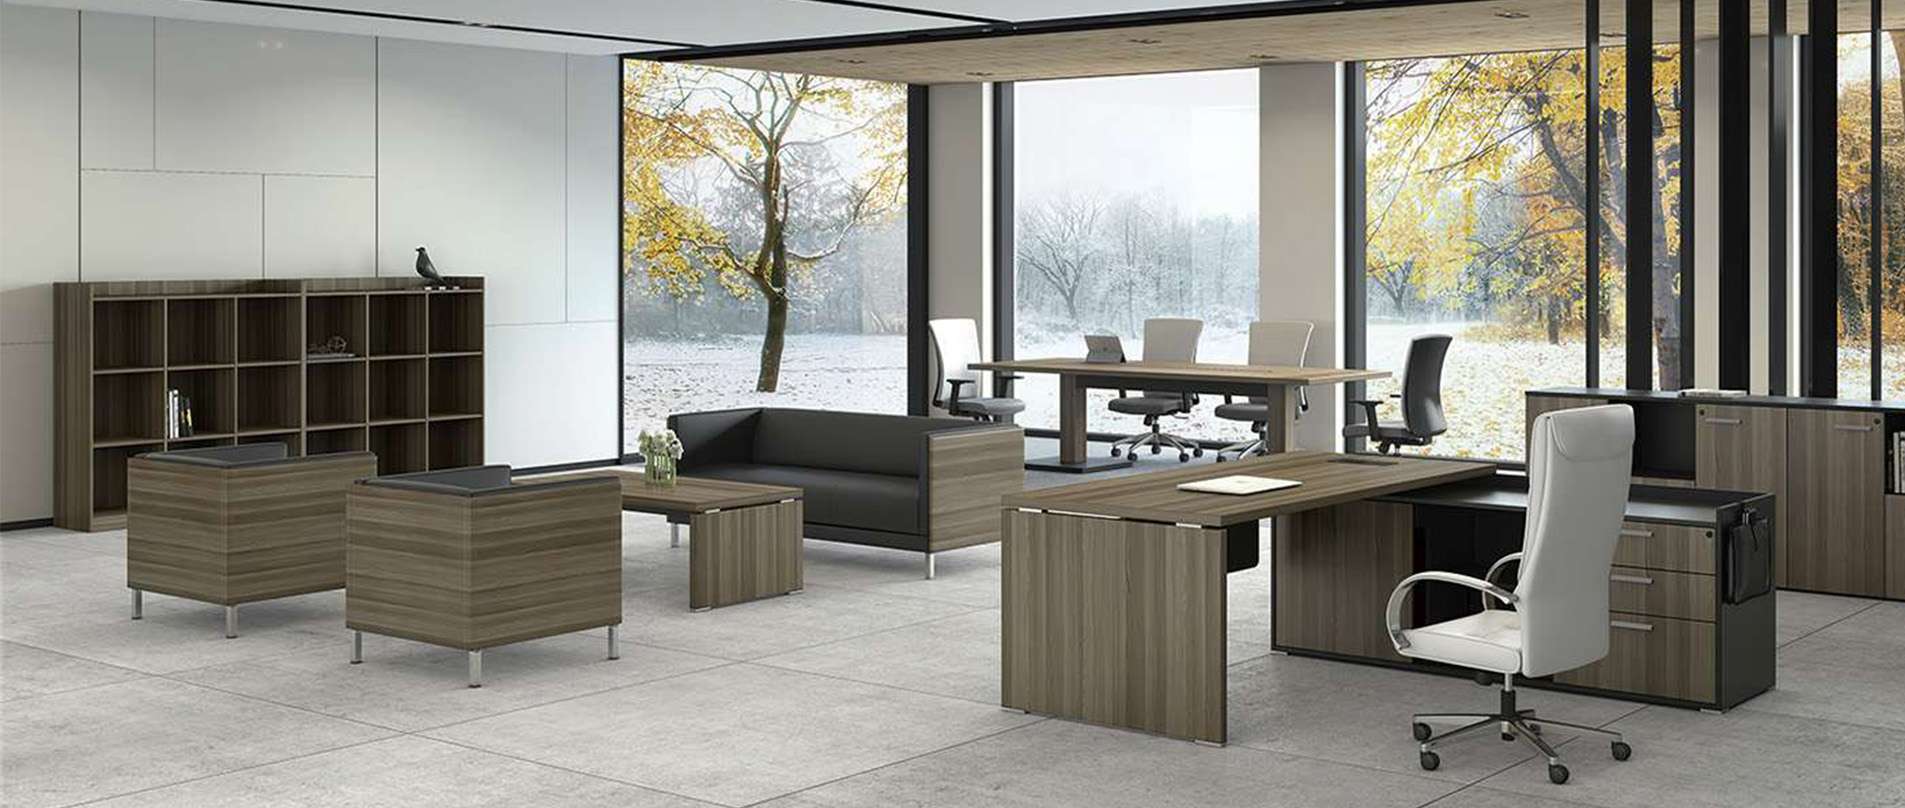 Domain | Lamex Office Furniture | Official Website of Lamex